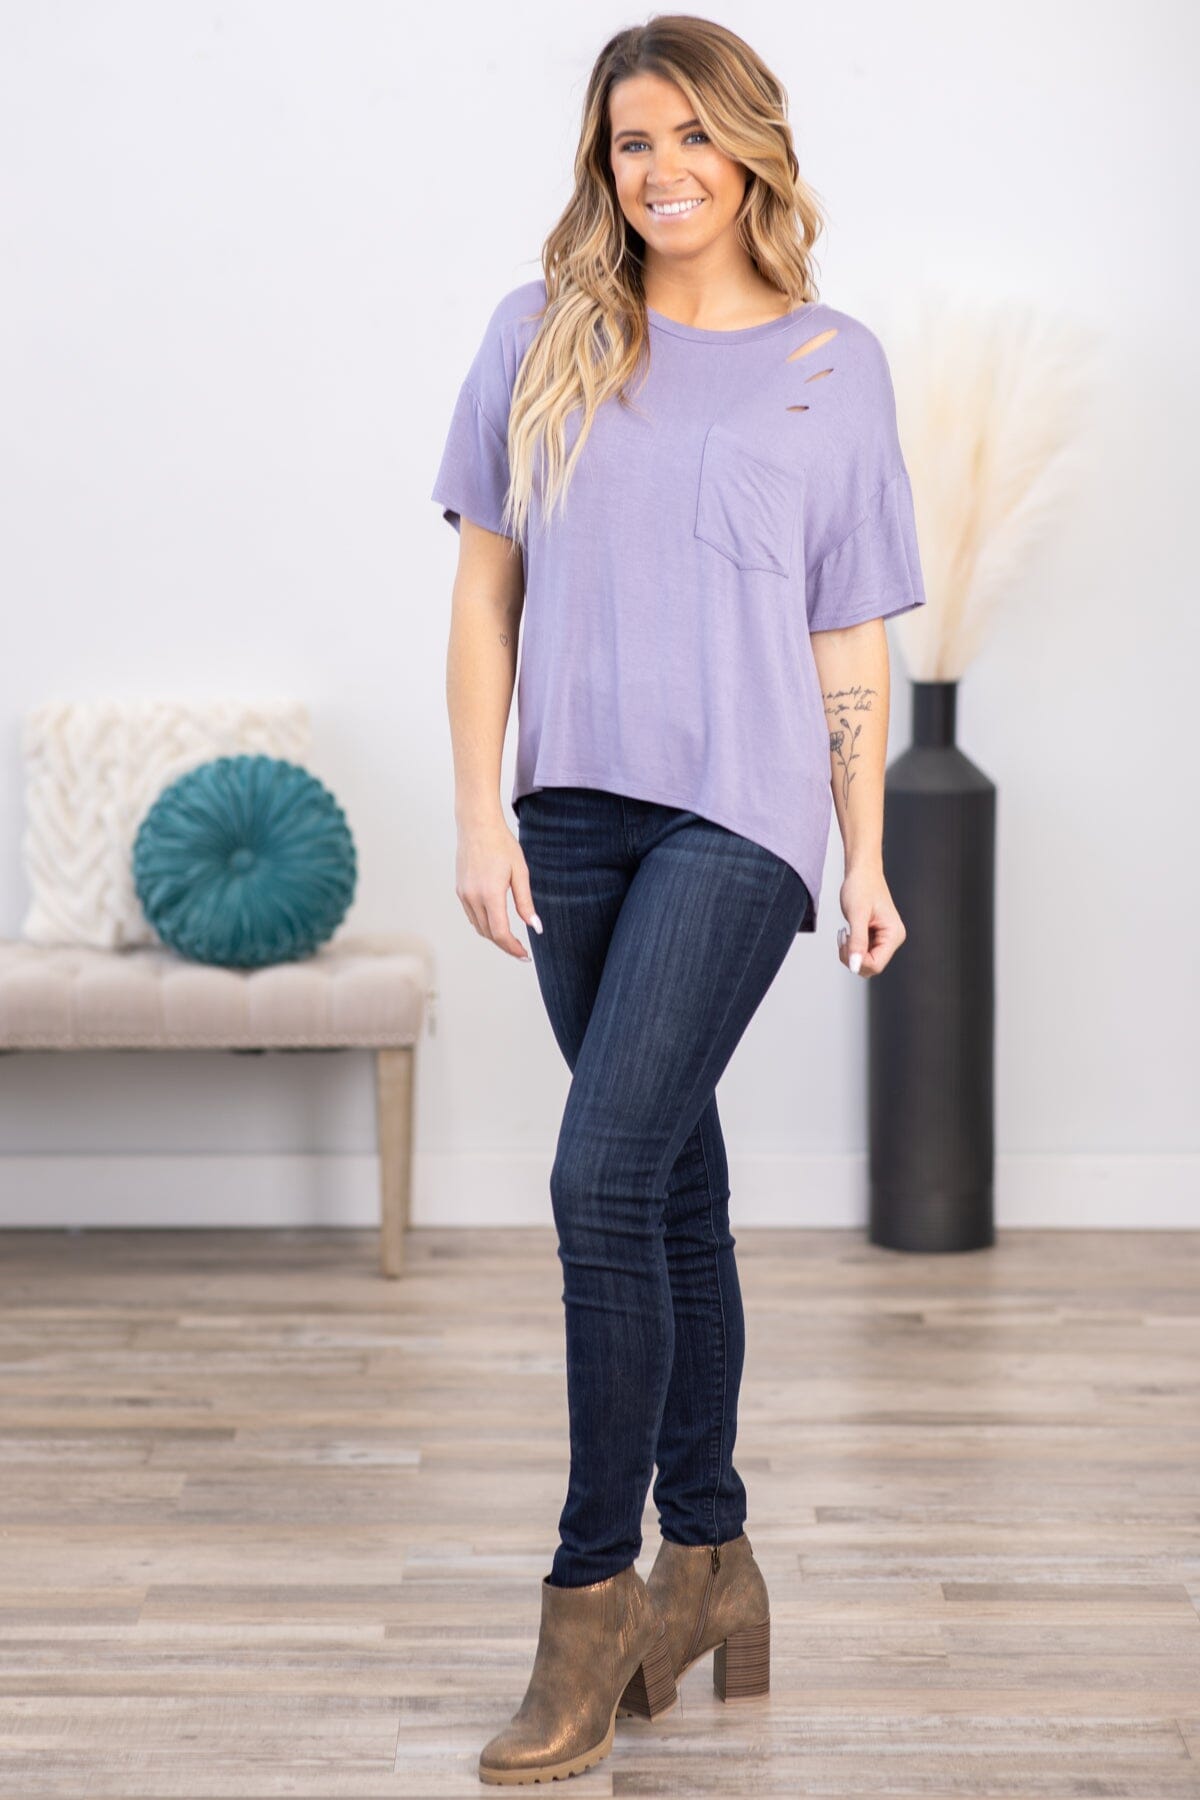 Lavender Distressed Top With Pocket - Filly Flair